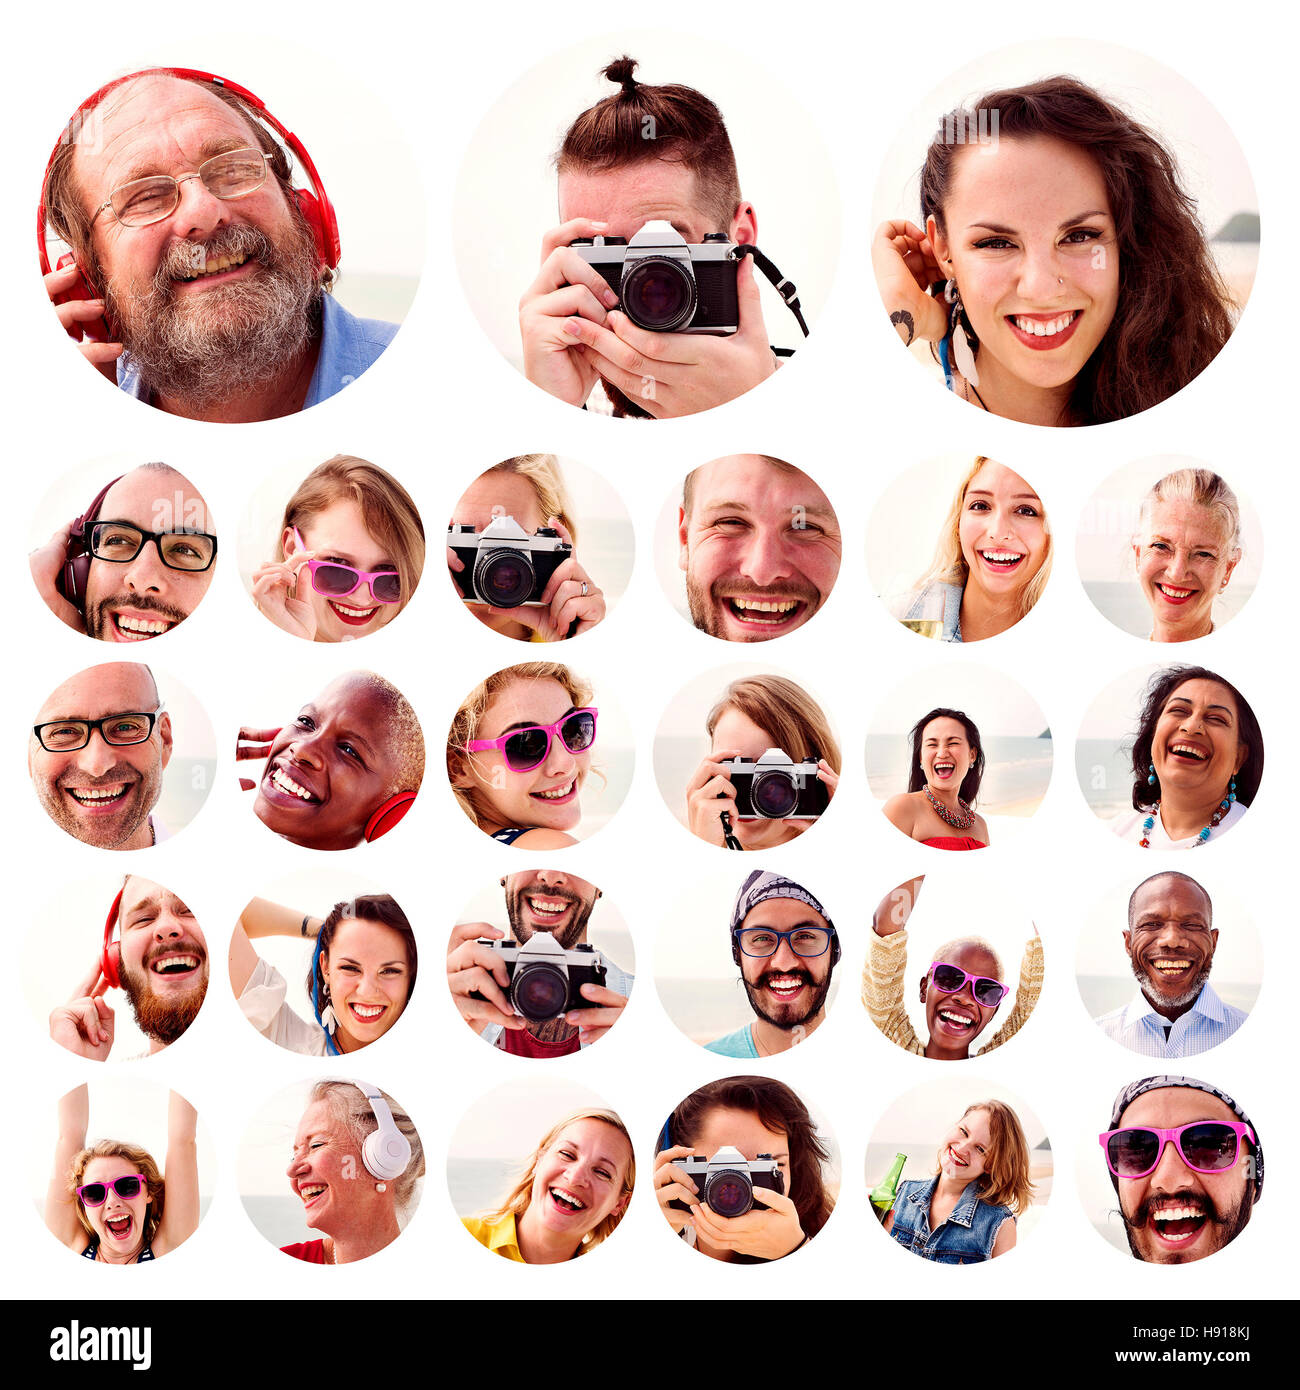 People Set of Faces Diversity Human Face Concept Stock Photo